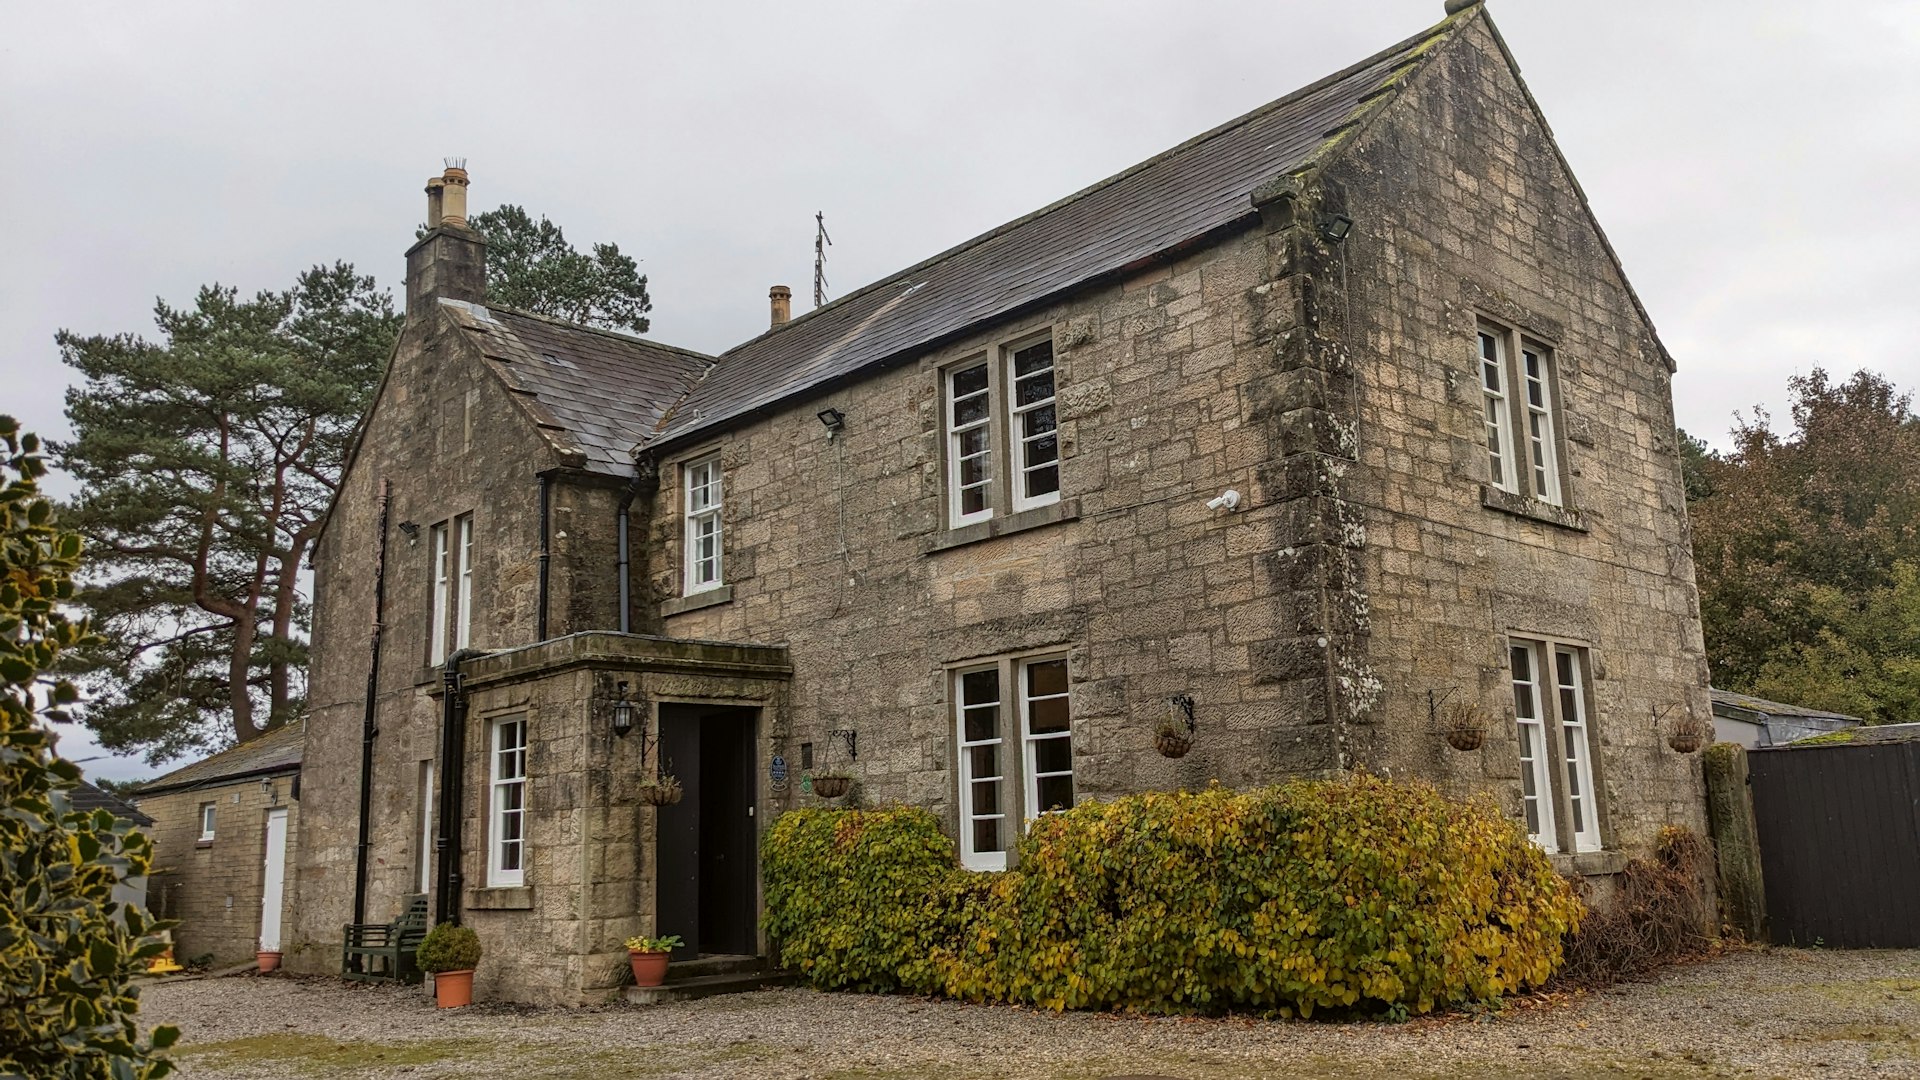 The exterior of Blackaddie Country House Hotel, Sanquhar.